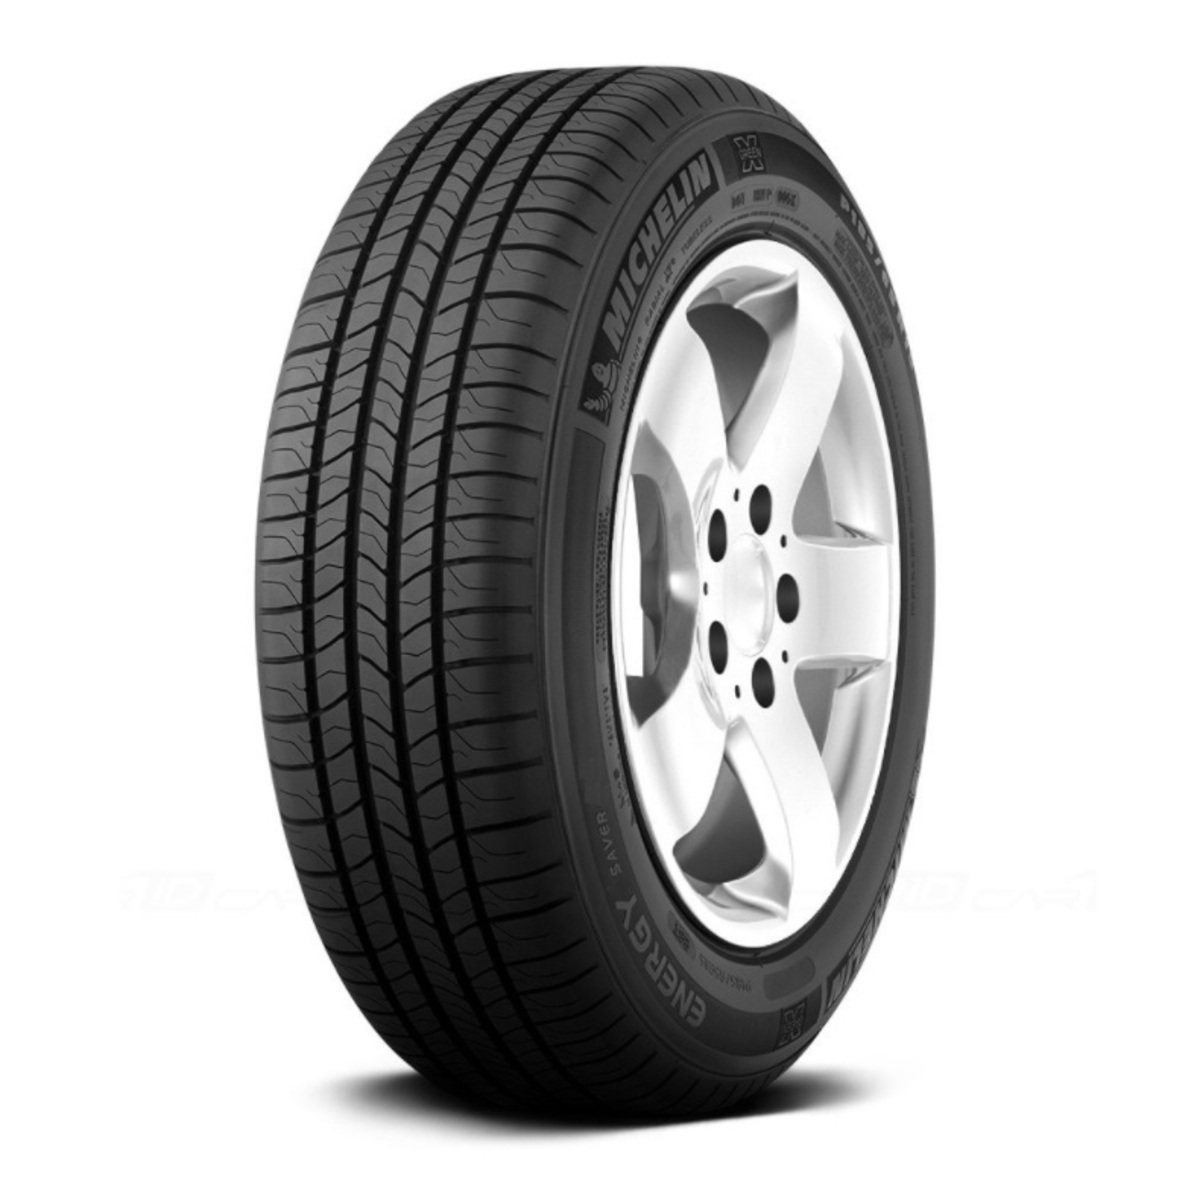 Michelin Energy Saver and Tests Tyre - Reviews